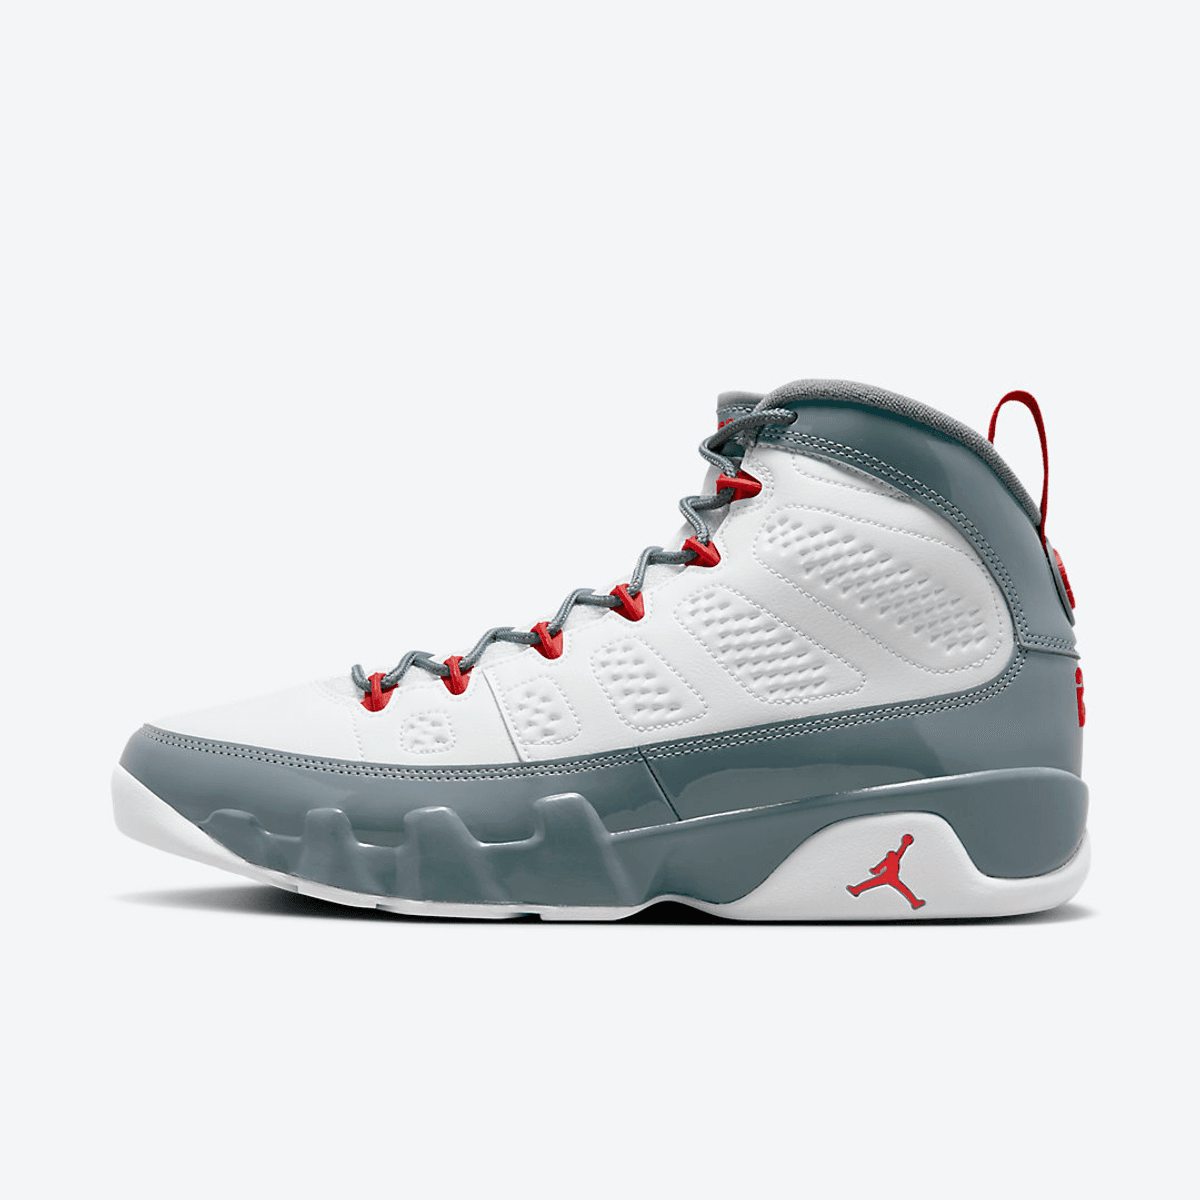 The Air Jordan 9 Returns in a New Fire Red Colorway